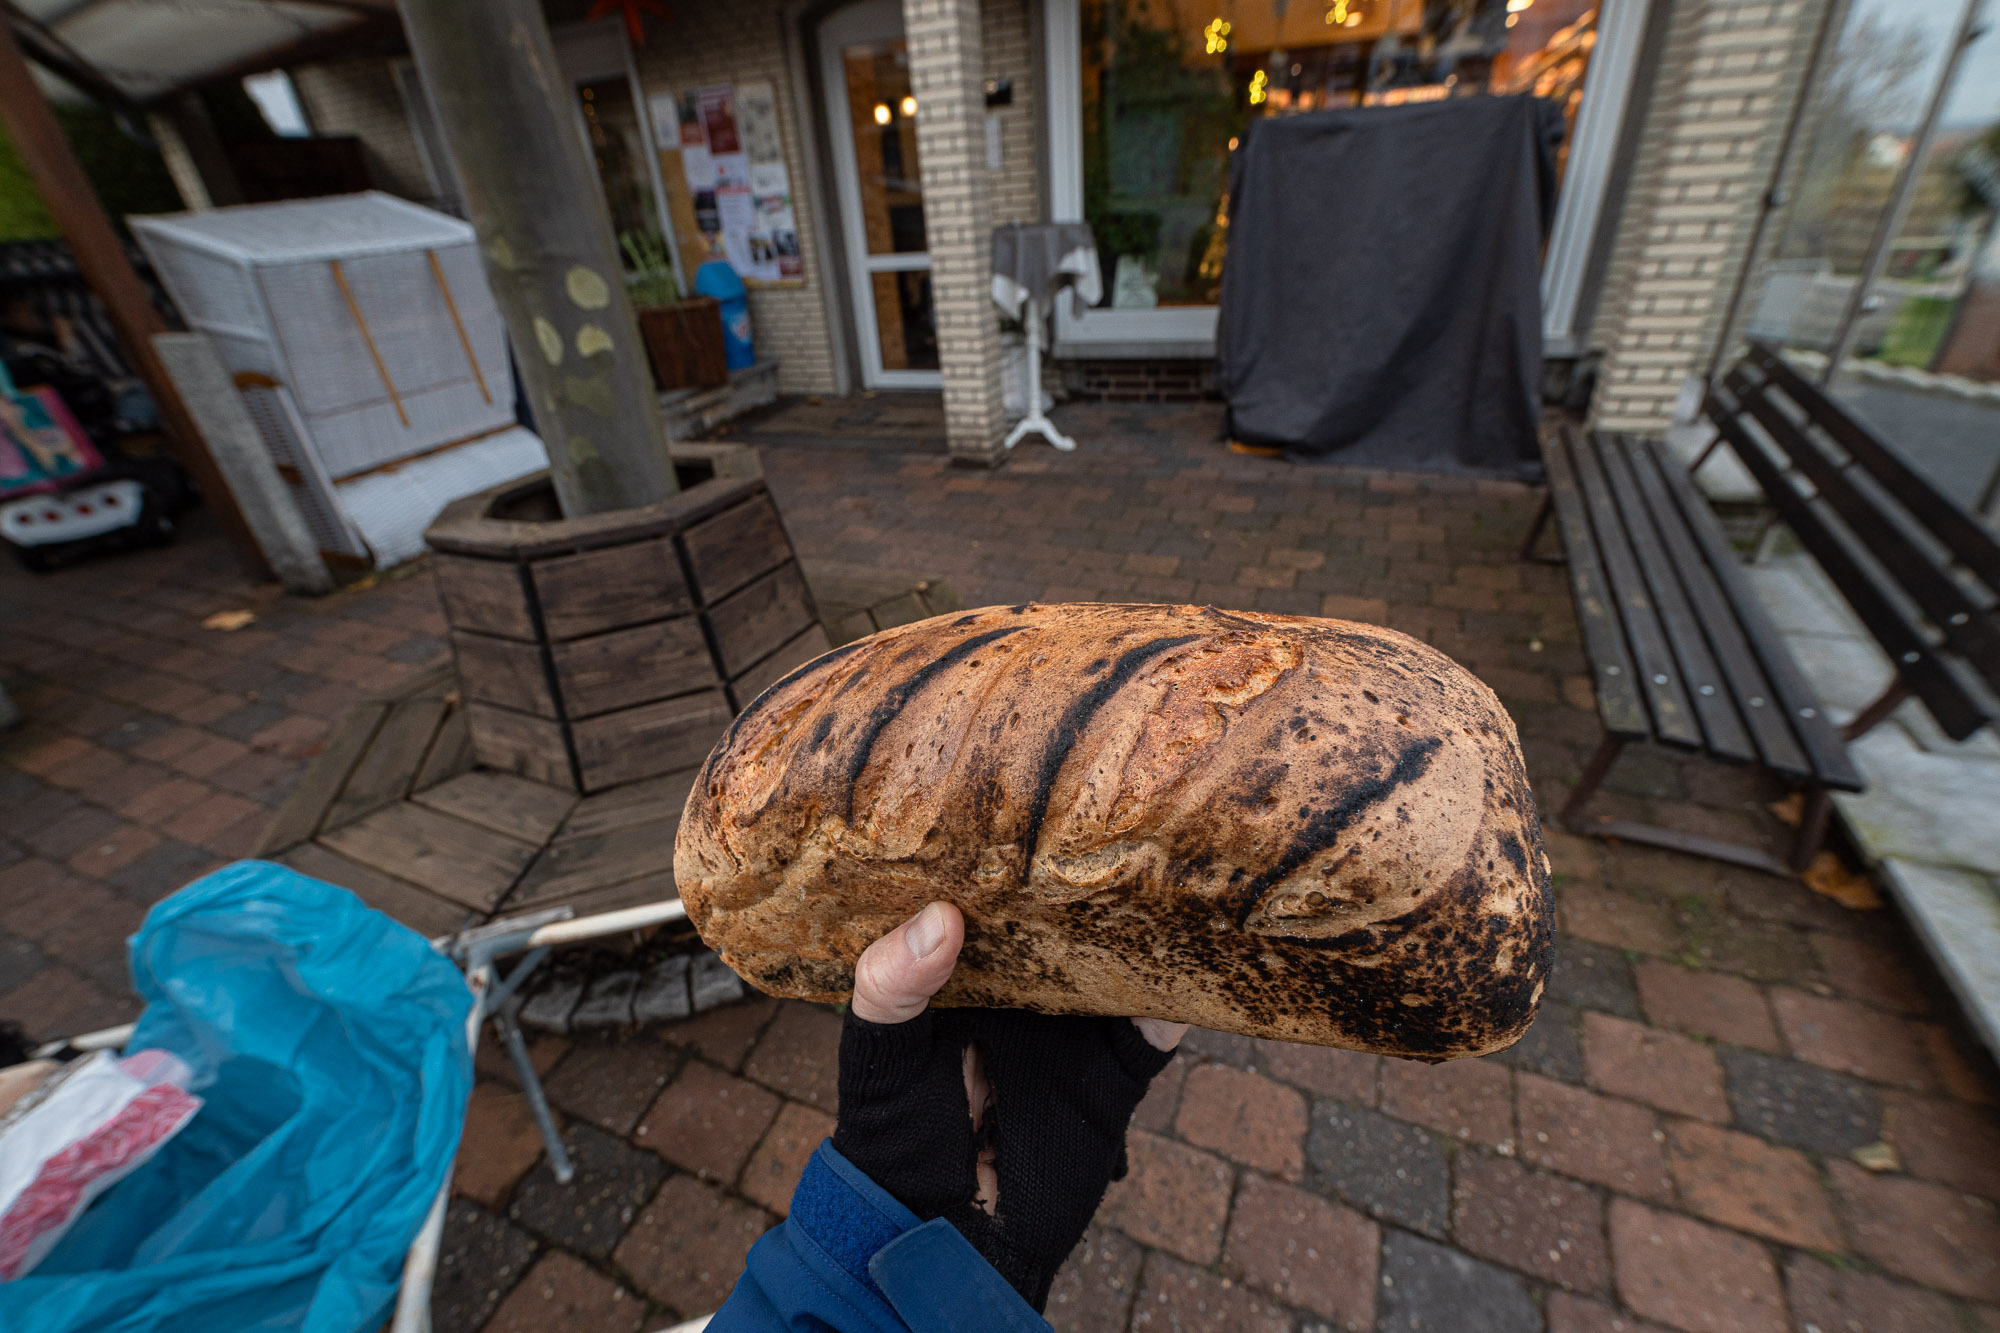 the loaf of Gersterbrot that I bought on my way home